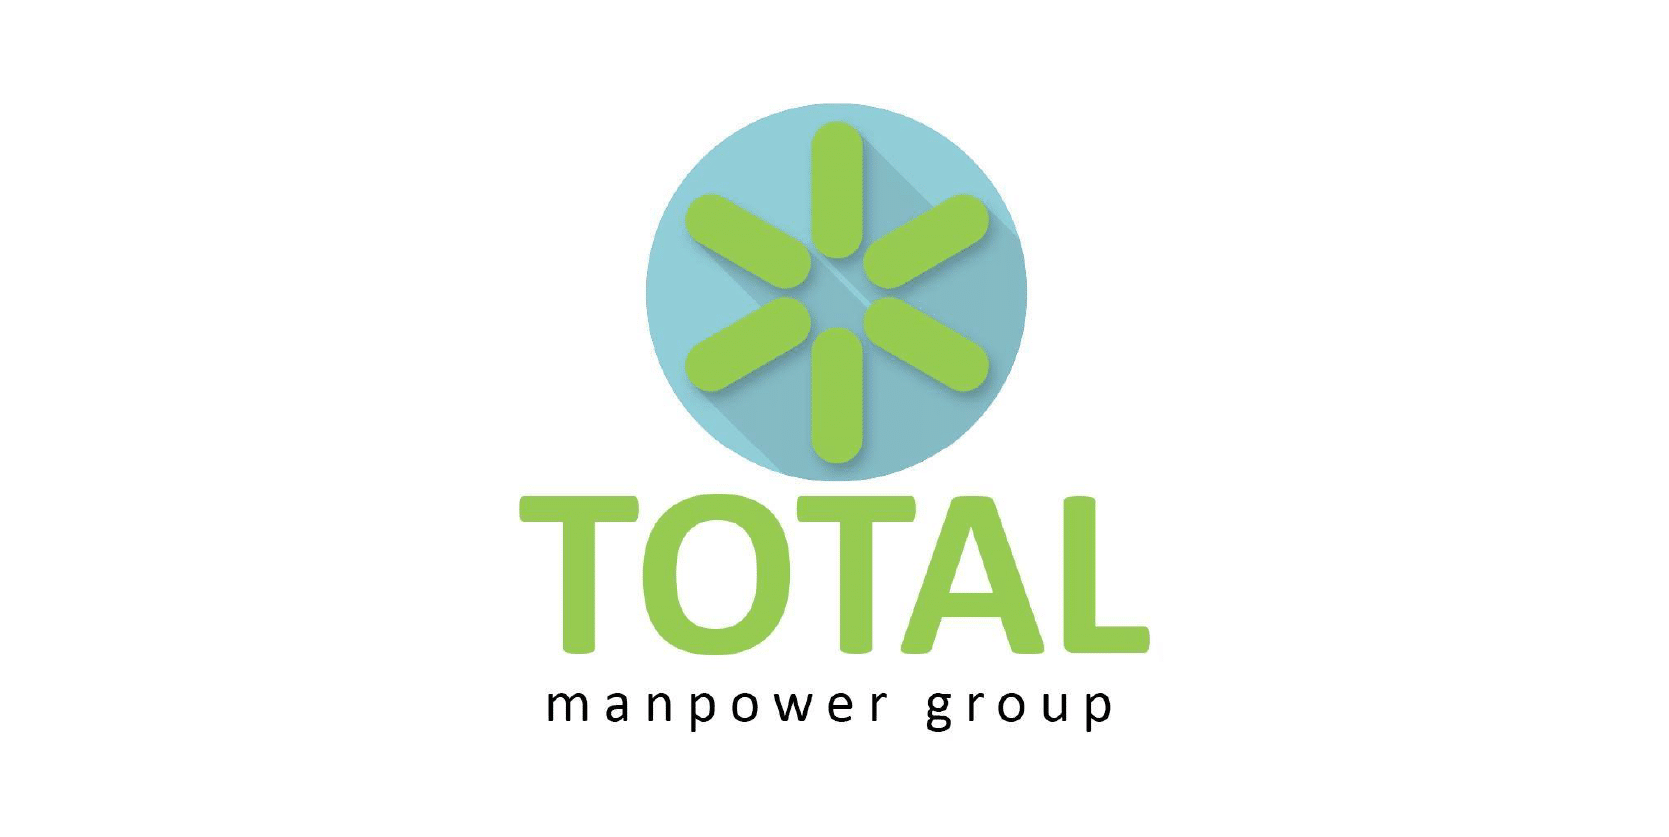 TOTAL MANPOWER GROUP